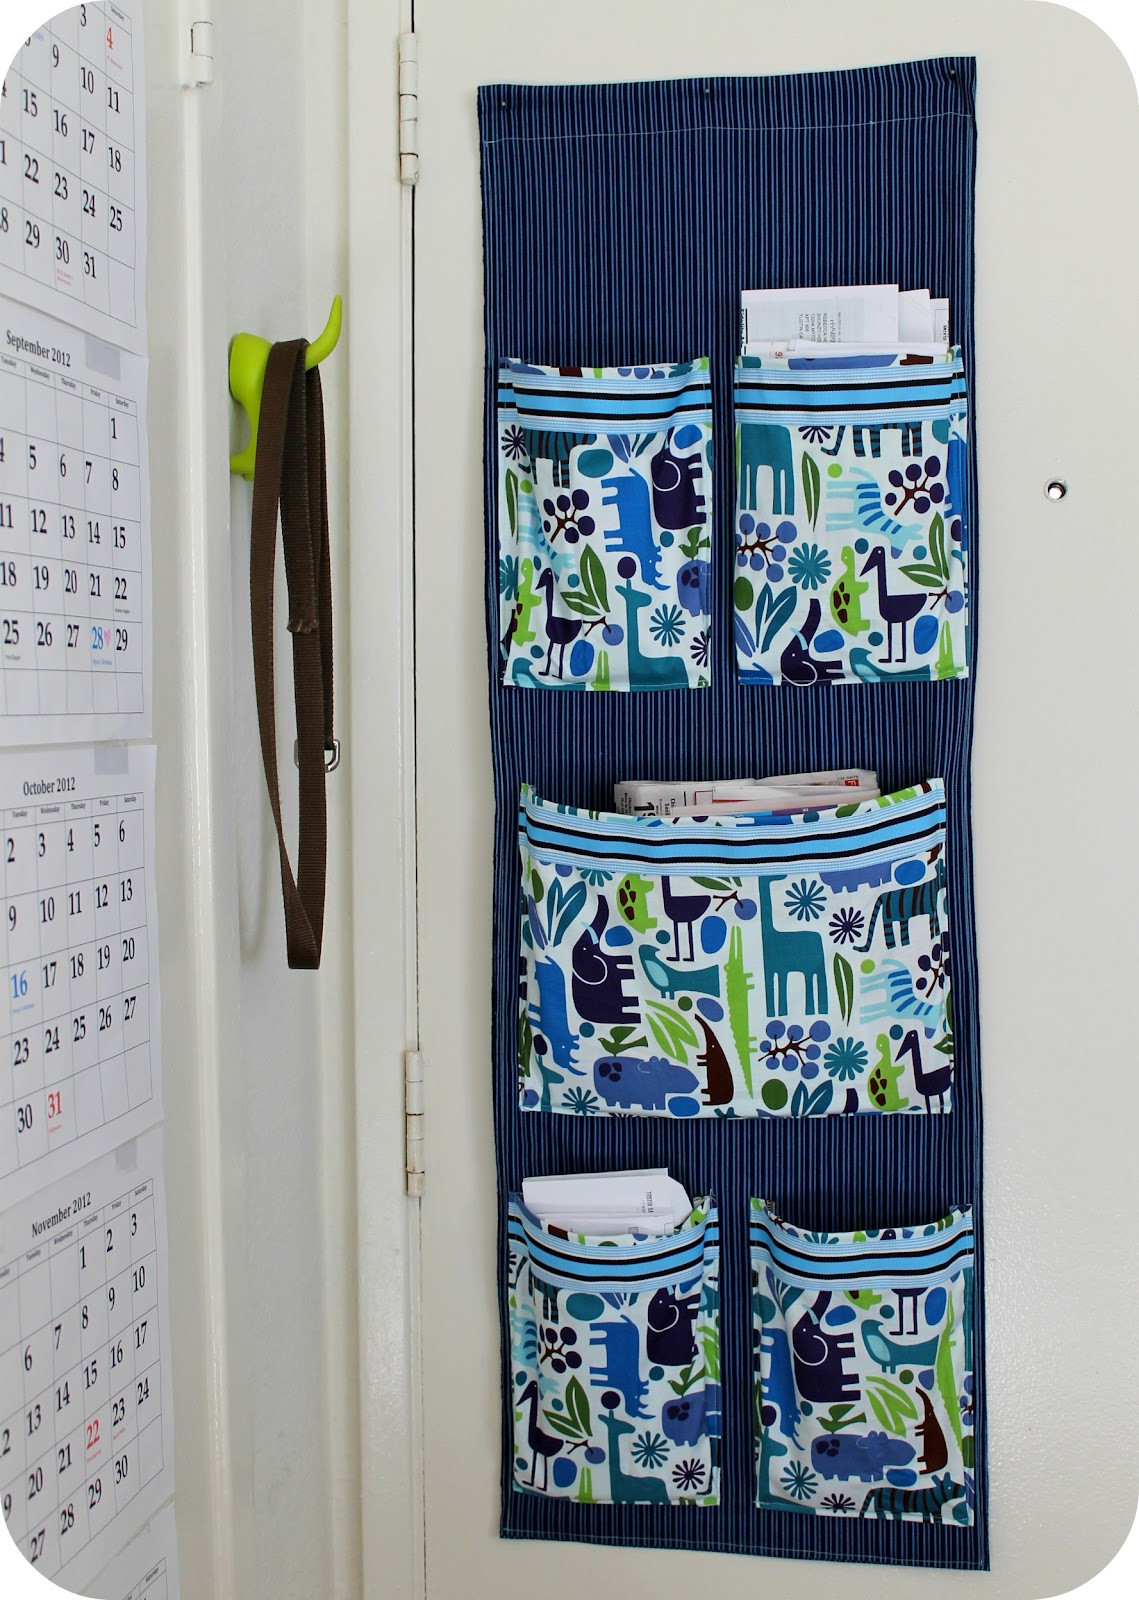 DIY Mail Organizer
 DiY Project Sew a Fabric Mail Organizer for the Wall